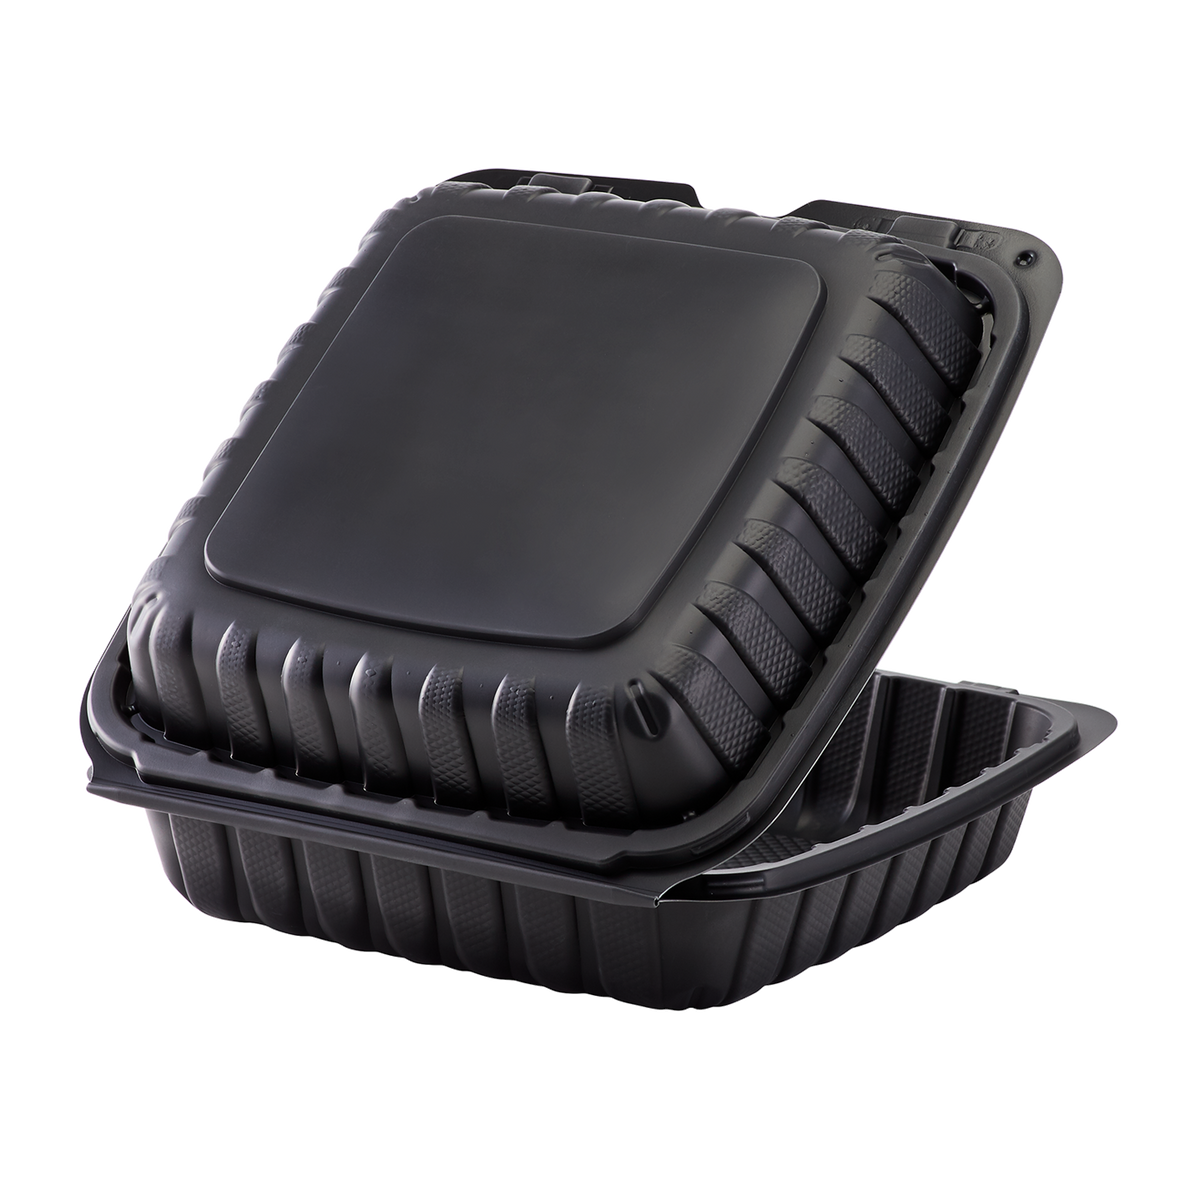 49oz Black Paper Take Out Container To Go Boxes Leftover Containers #2 —  thatpaperstore